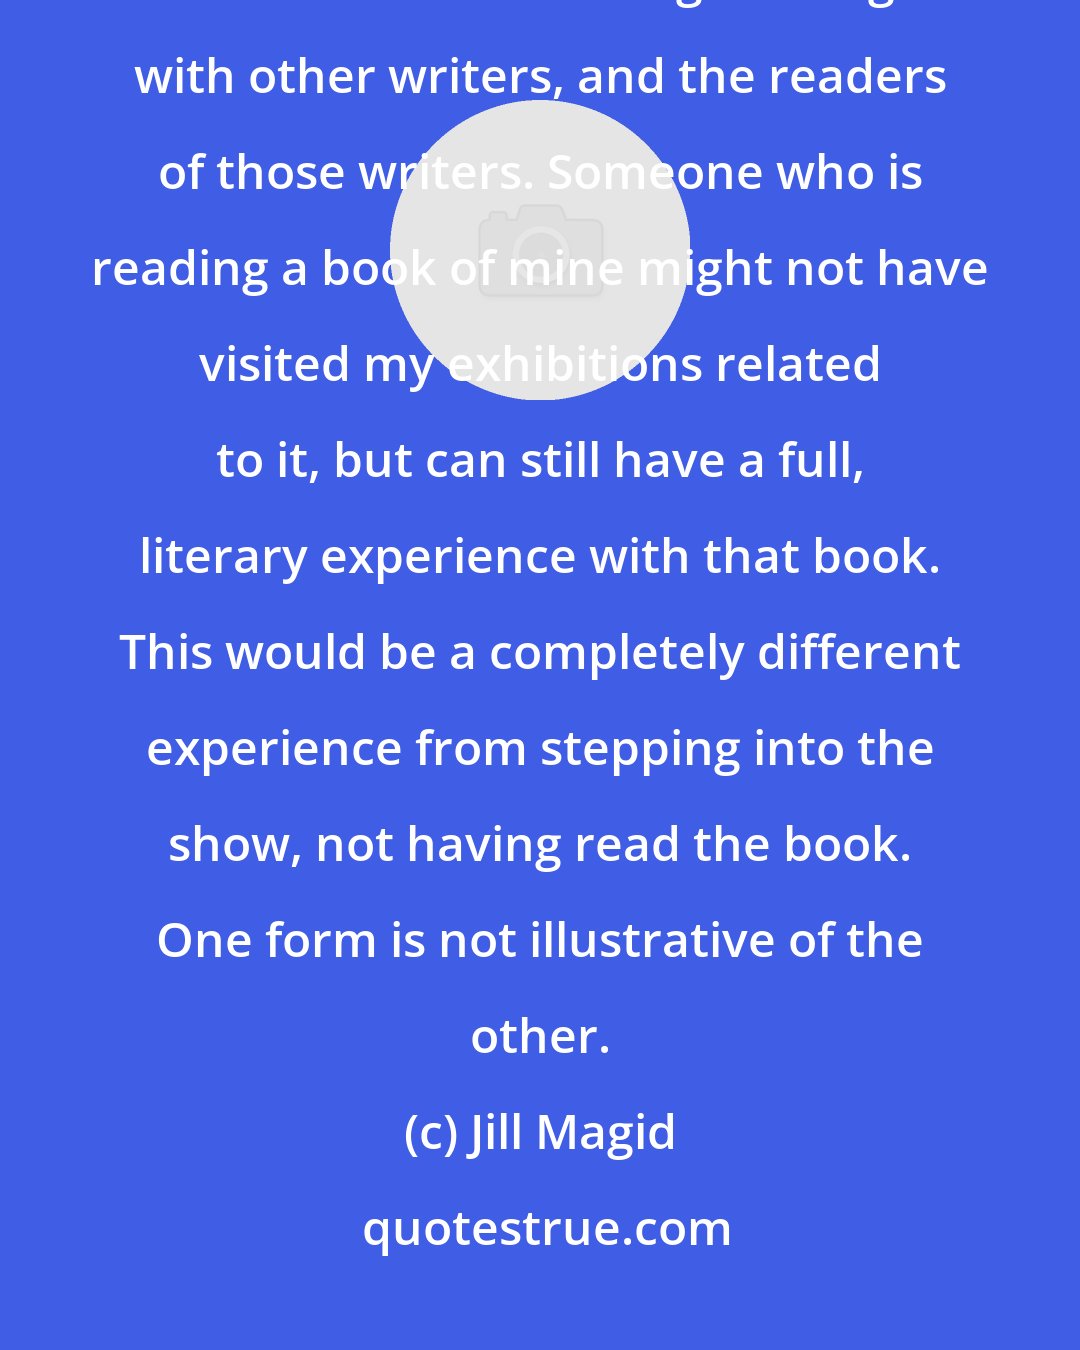 Jill Magid: I want my books to exist in the literary world, not only in the art world. I am interested in having a dialogue with other writers, and the readers of those writers. Someone who is reading a book of mine might not have visited my exhibitions related to it, but can still have a full, literary experience with that book. This would be a completely different experience from stepping into the show, not having read the book. One form is not illustrative of the other.